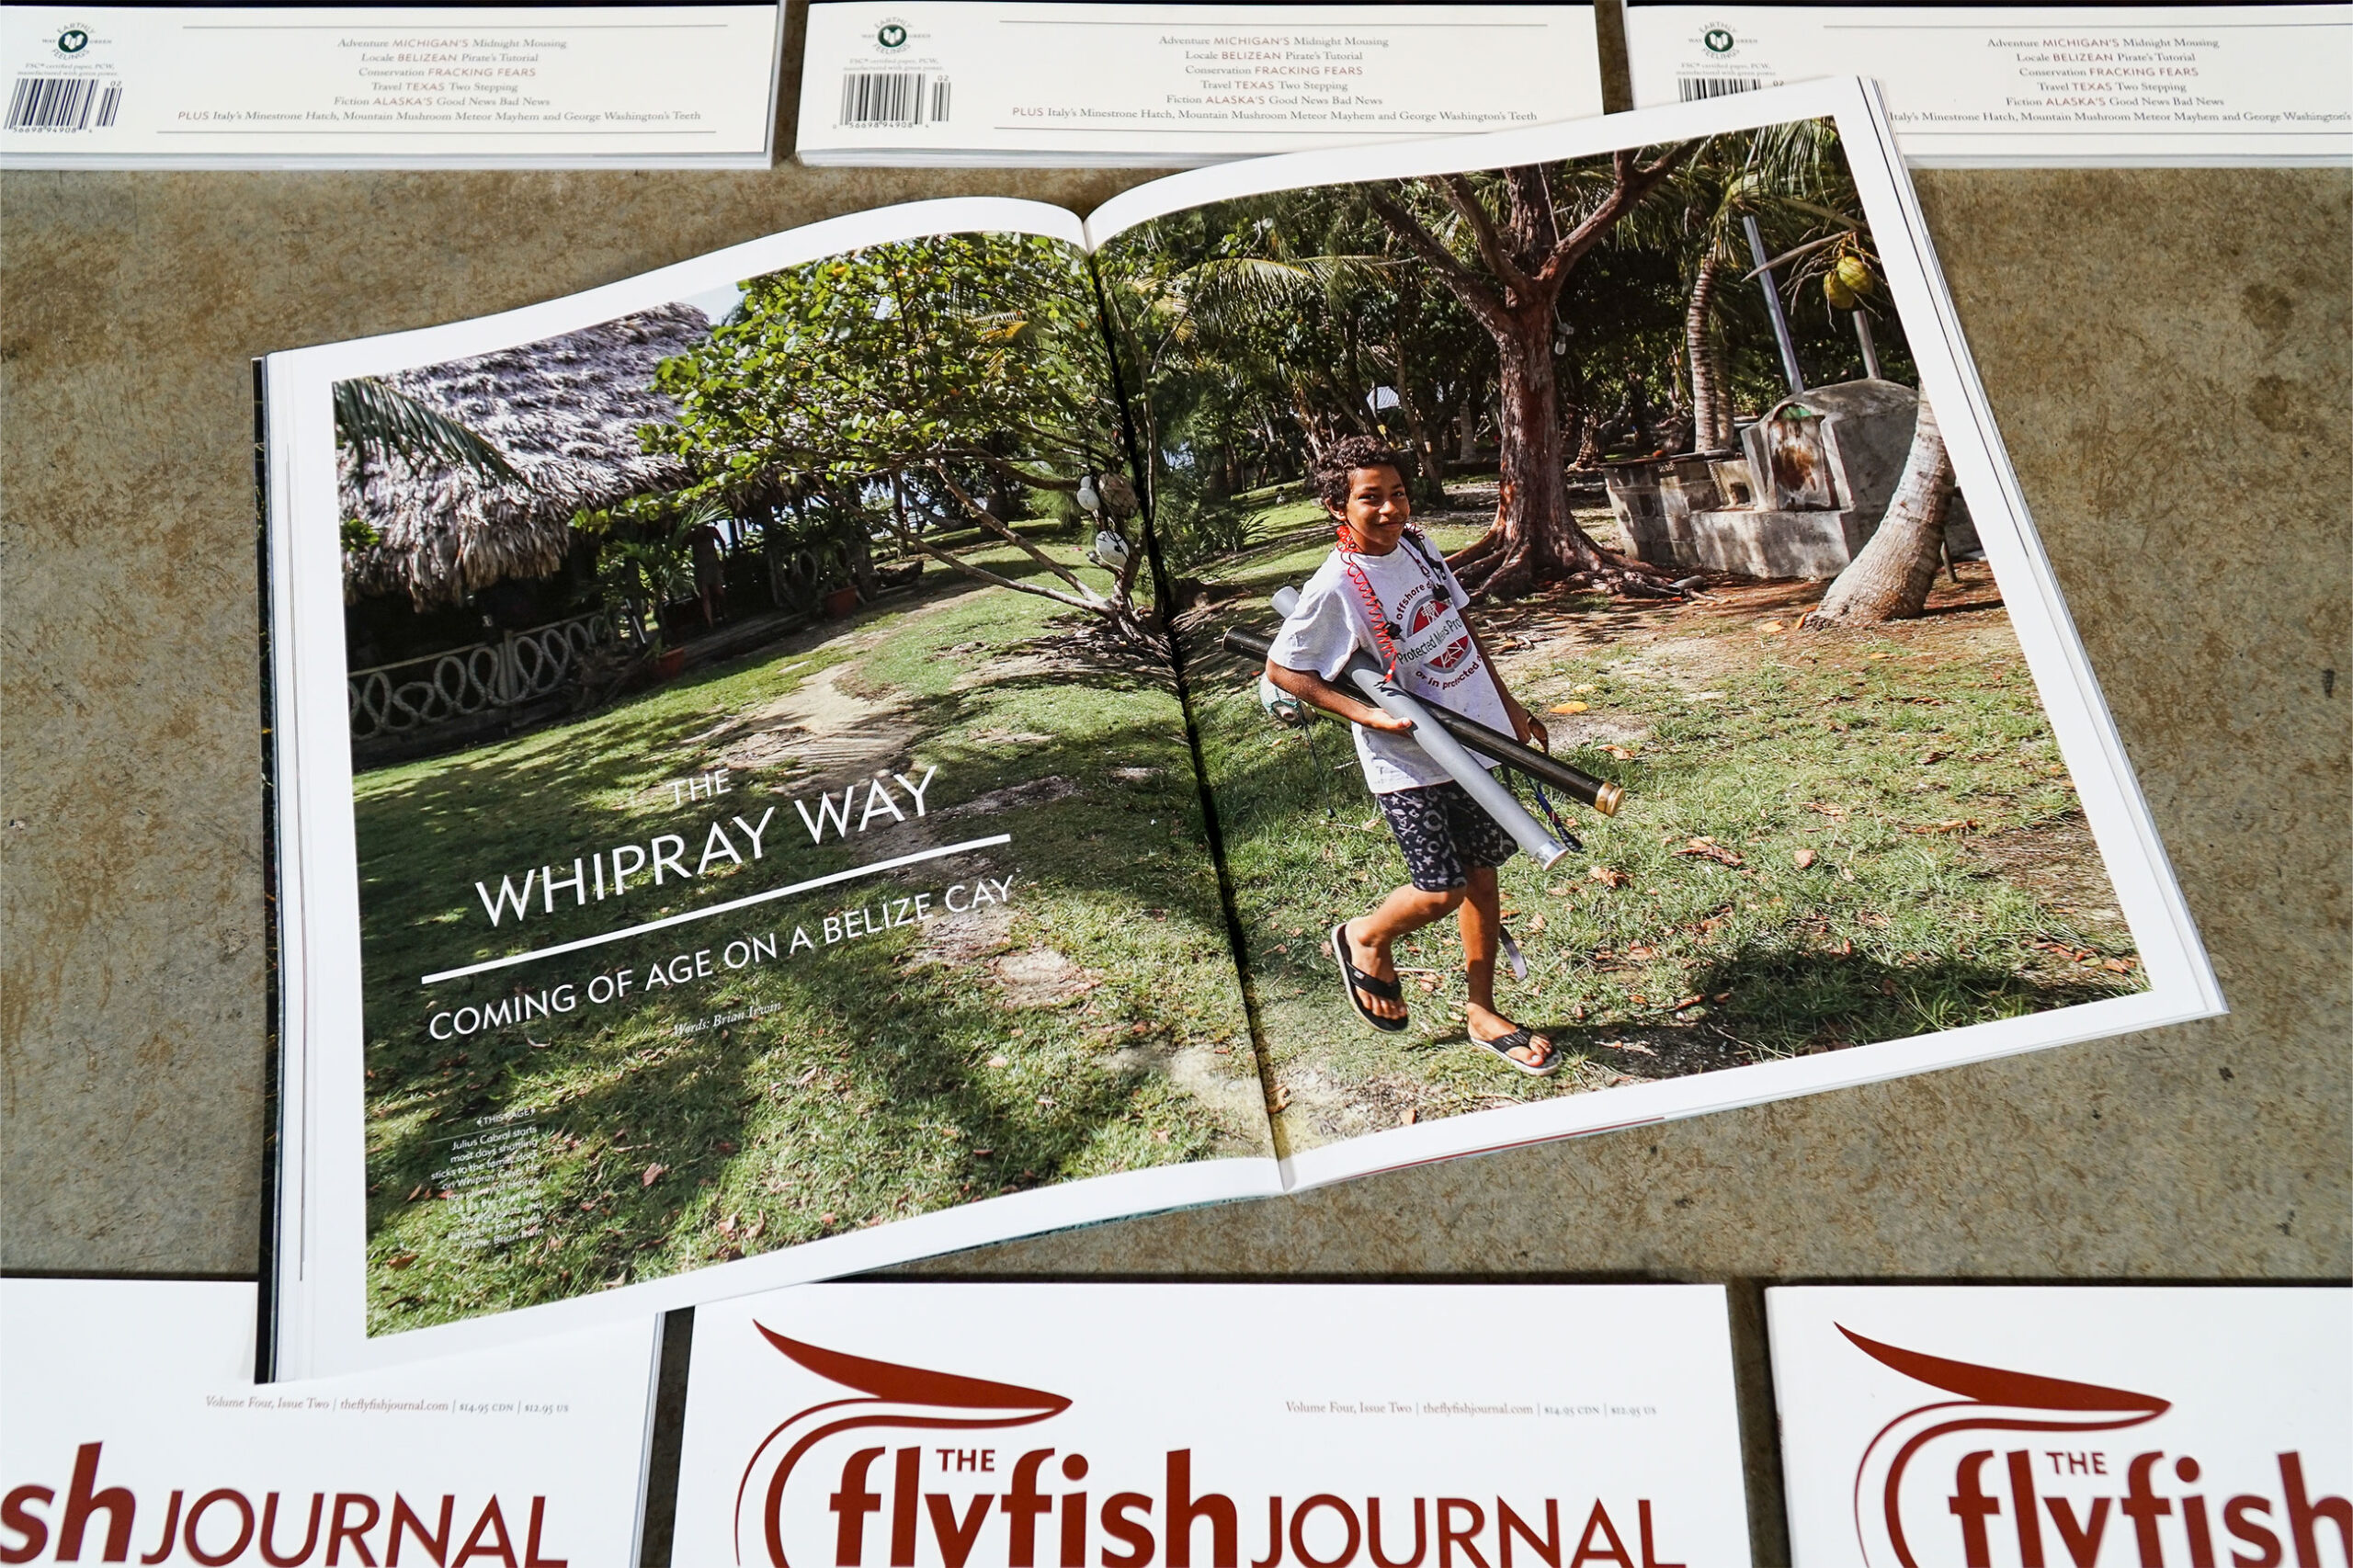 The Flyfish Journal Volume 4 Issue 2 Feature The Whipray Way